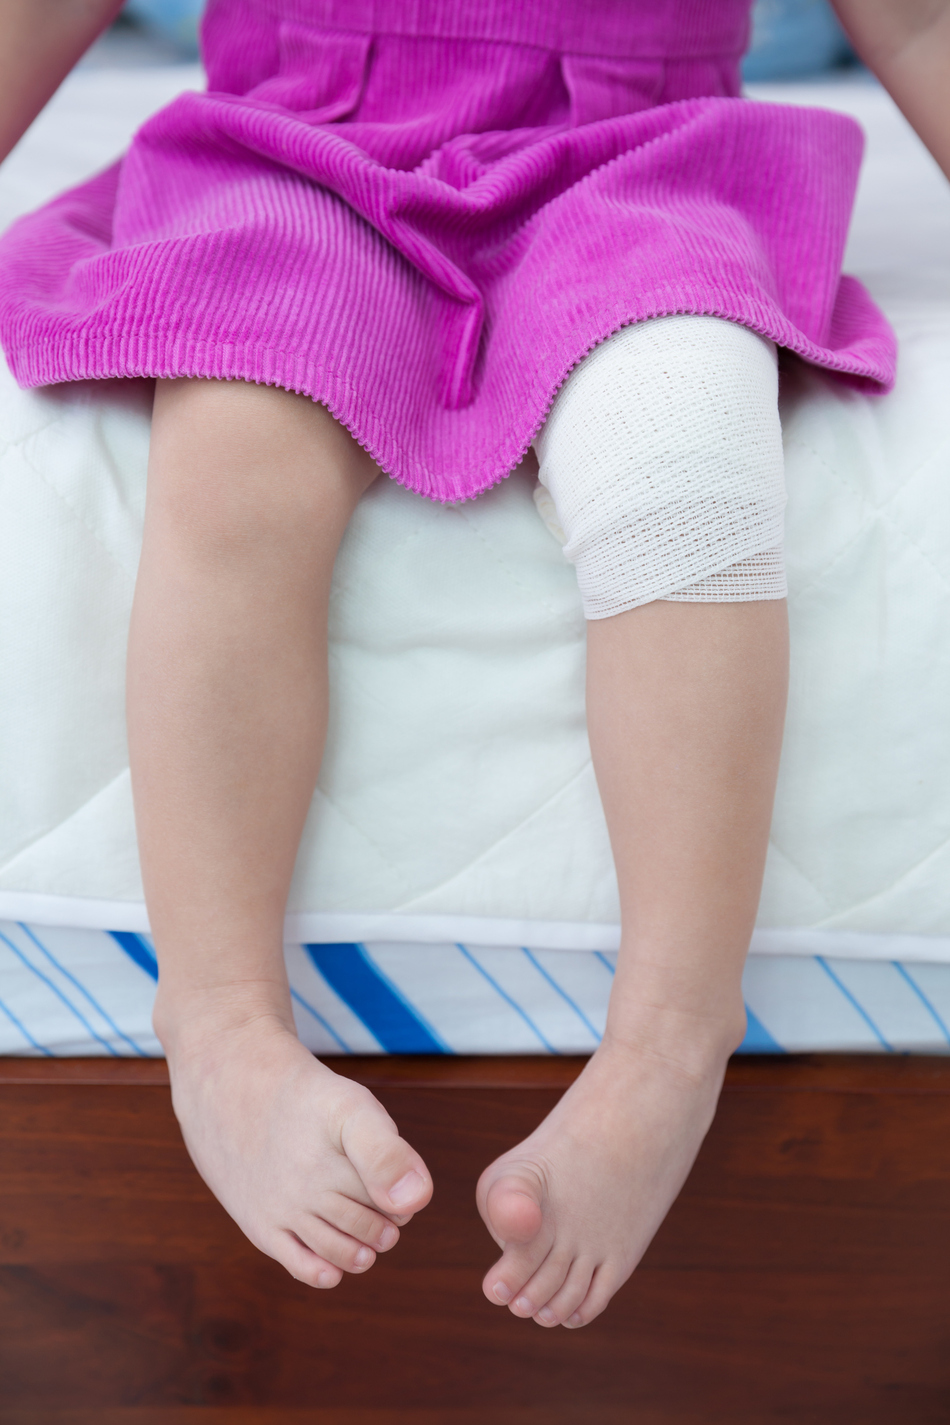 The Differences Between a Child’s and Adult’s Knee Injury